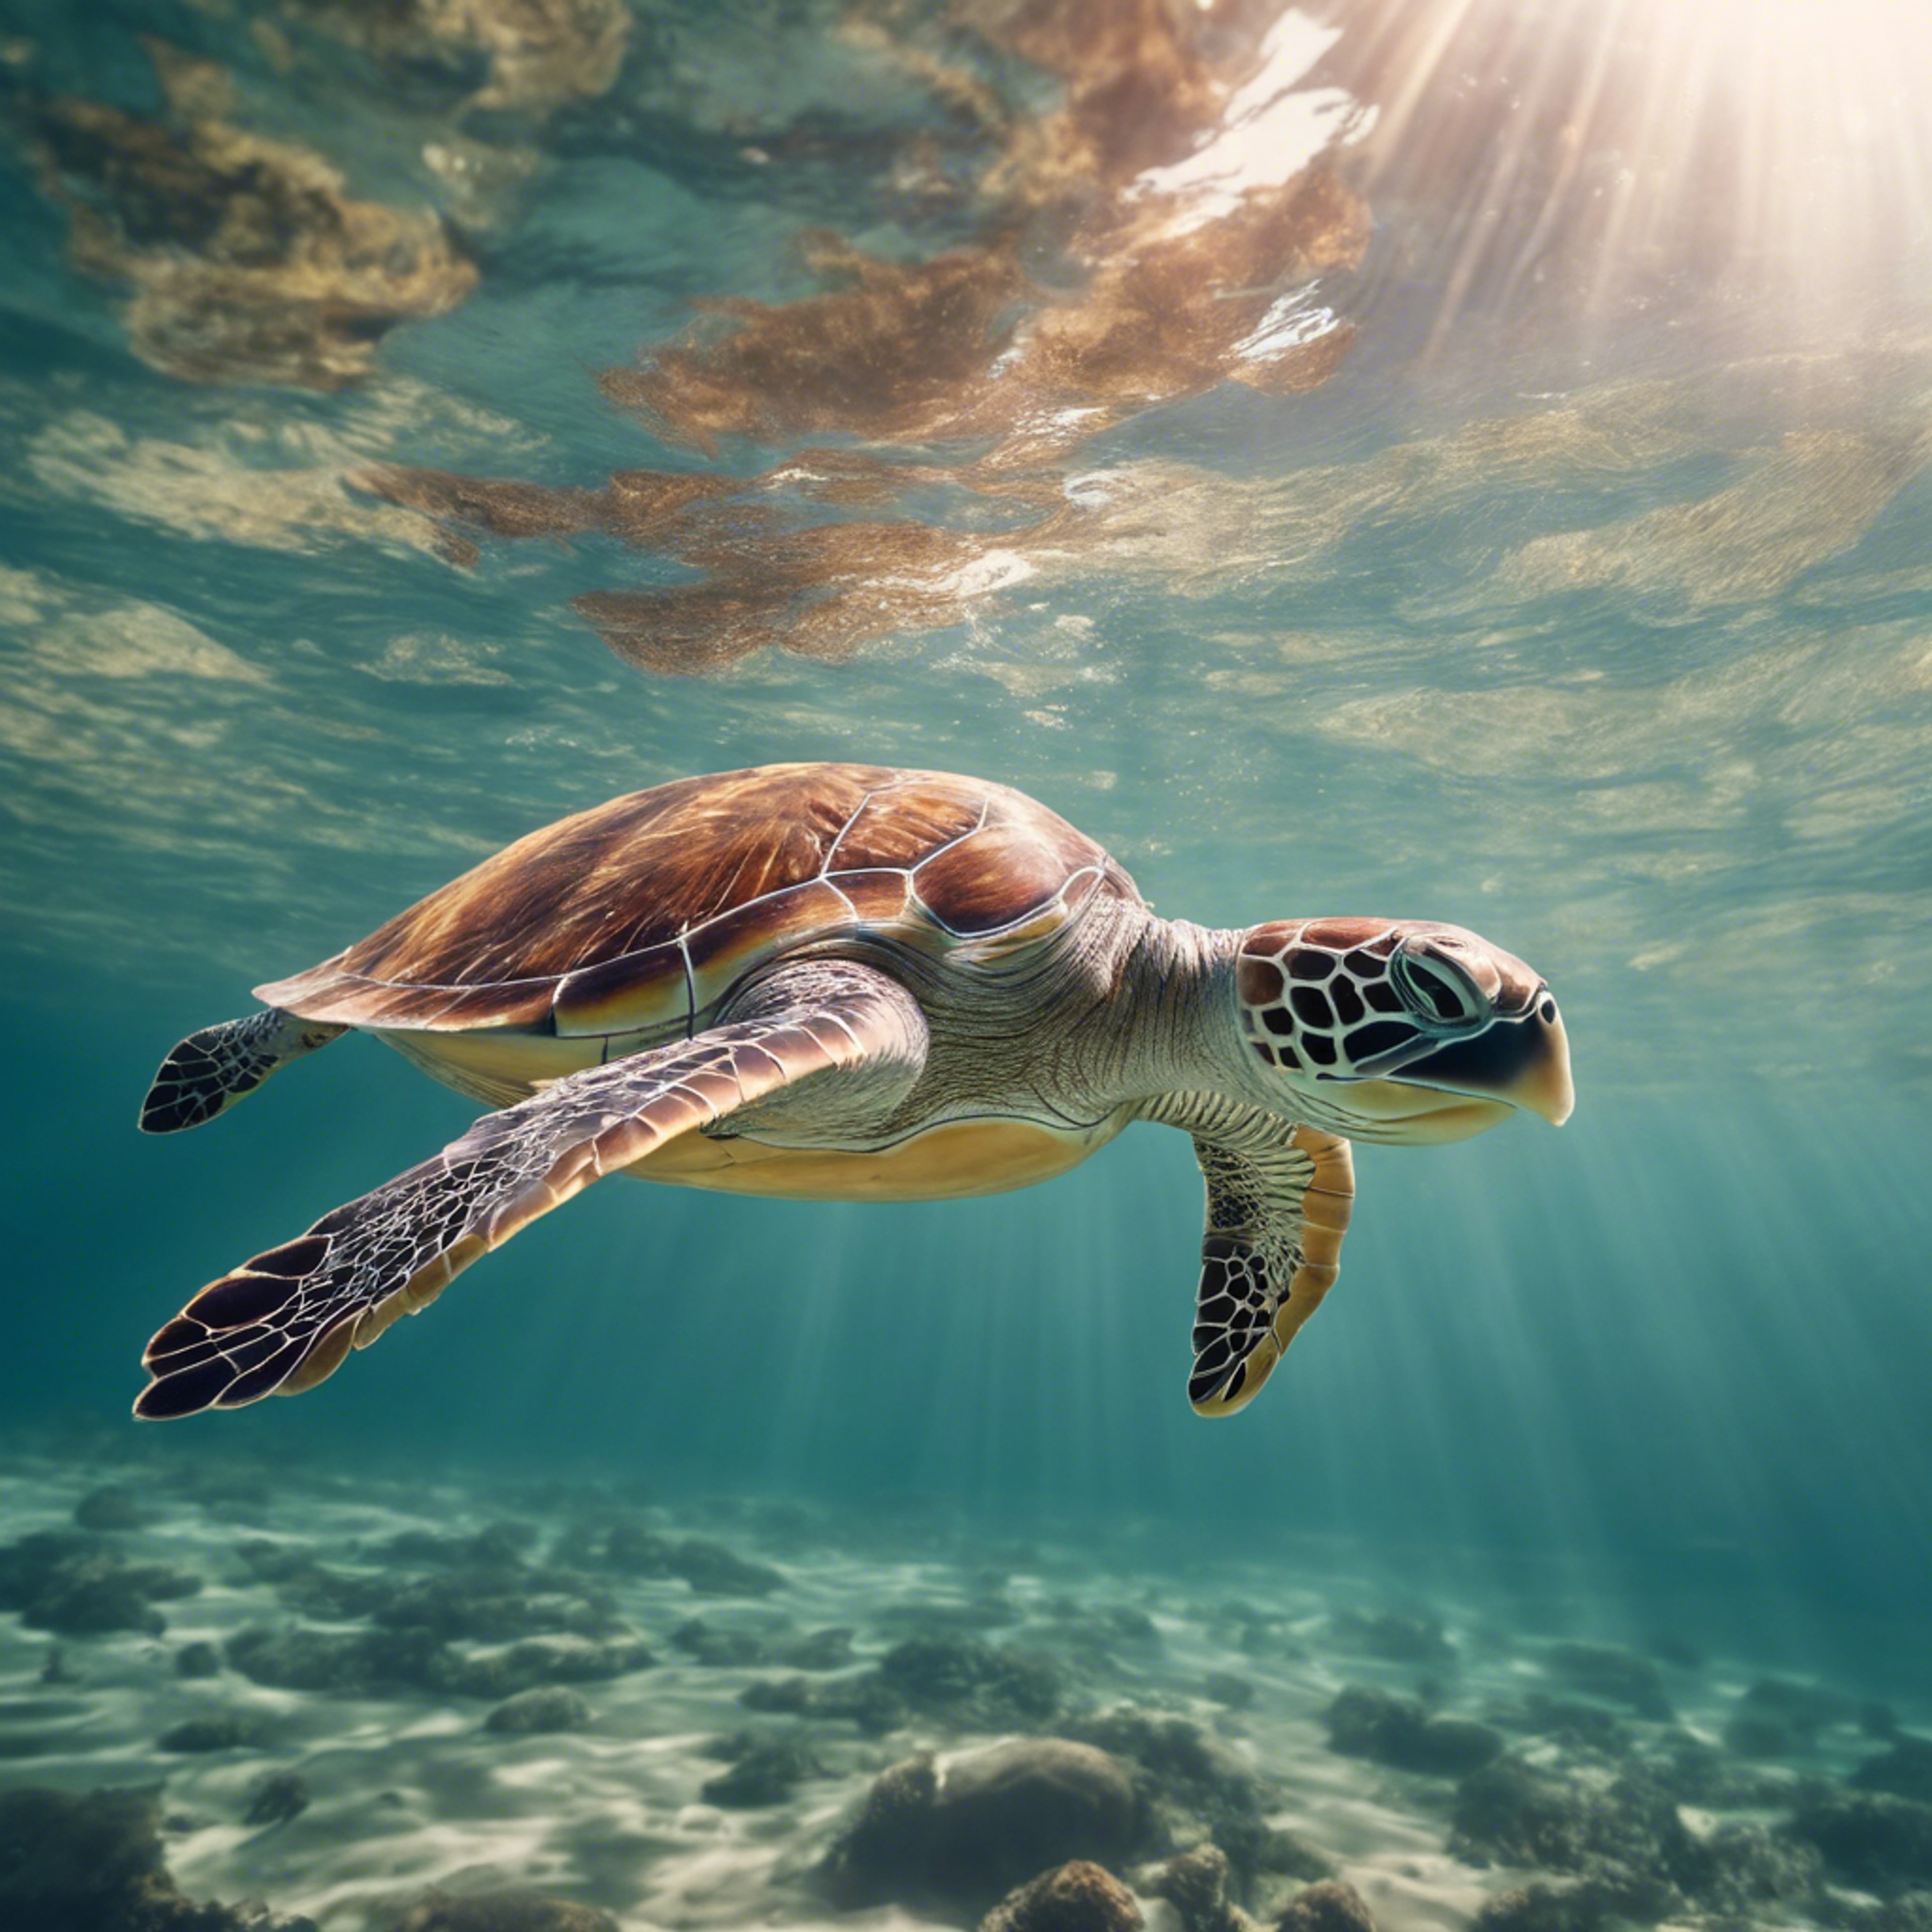 Sea turtle swimming leisurely in the ocean, with the sun penetrating the surface of the water above. 墙纸[52b0564e310d4ce7b781]